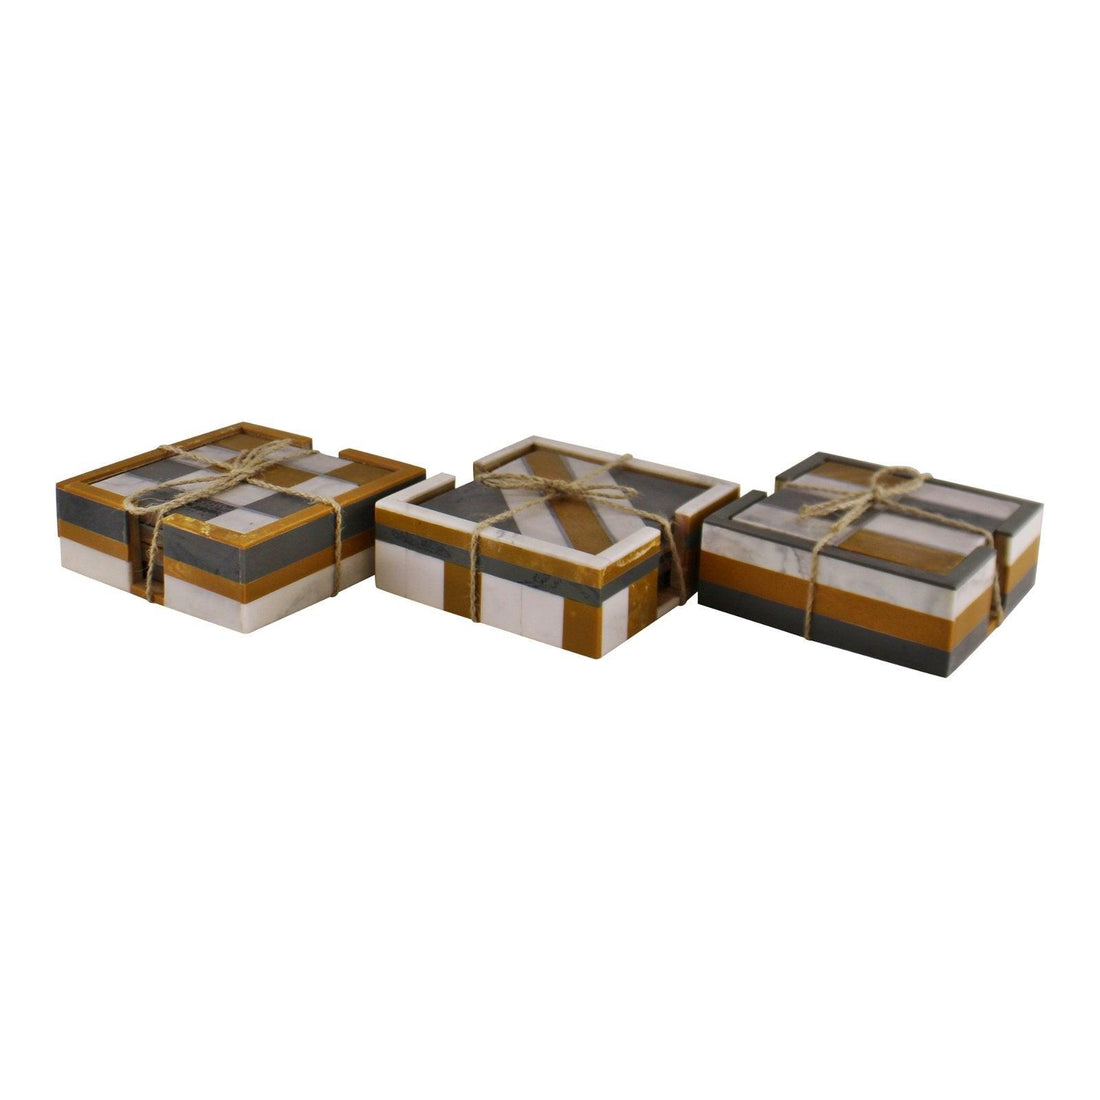 Set of 4 Square, Resin Coasters, Abstract Design - £20.99 - Coasters & Placemats 